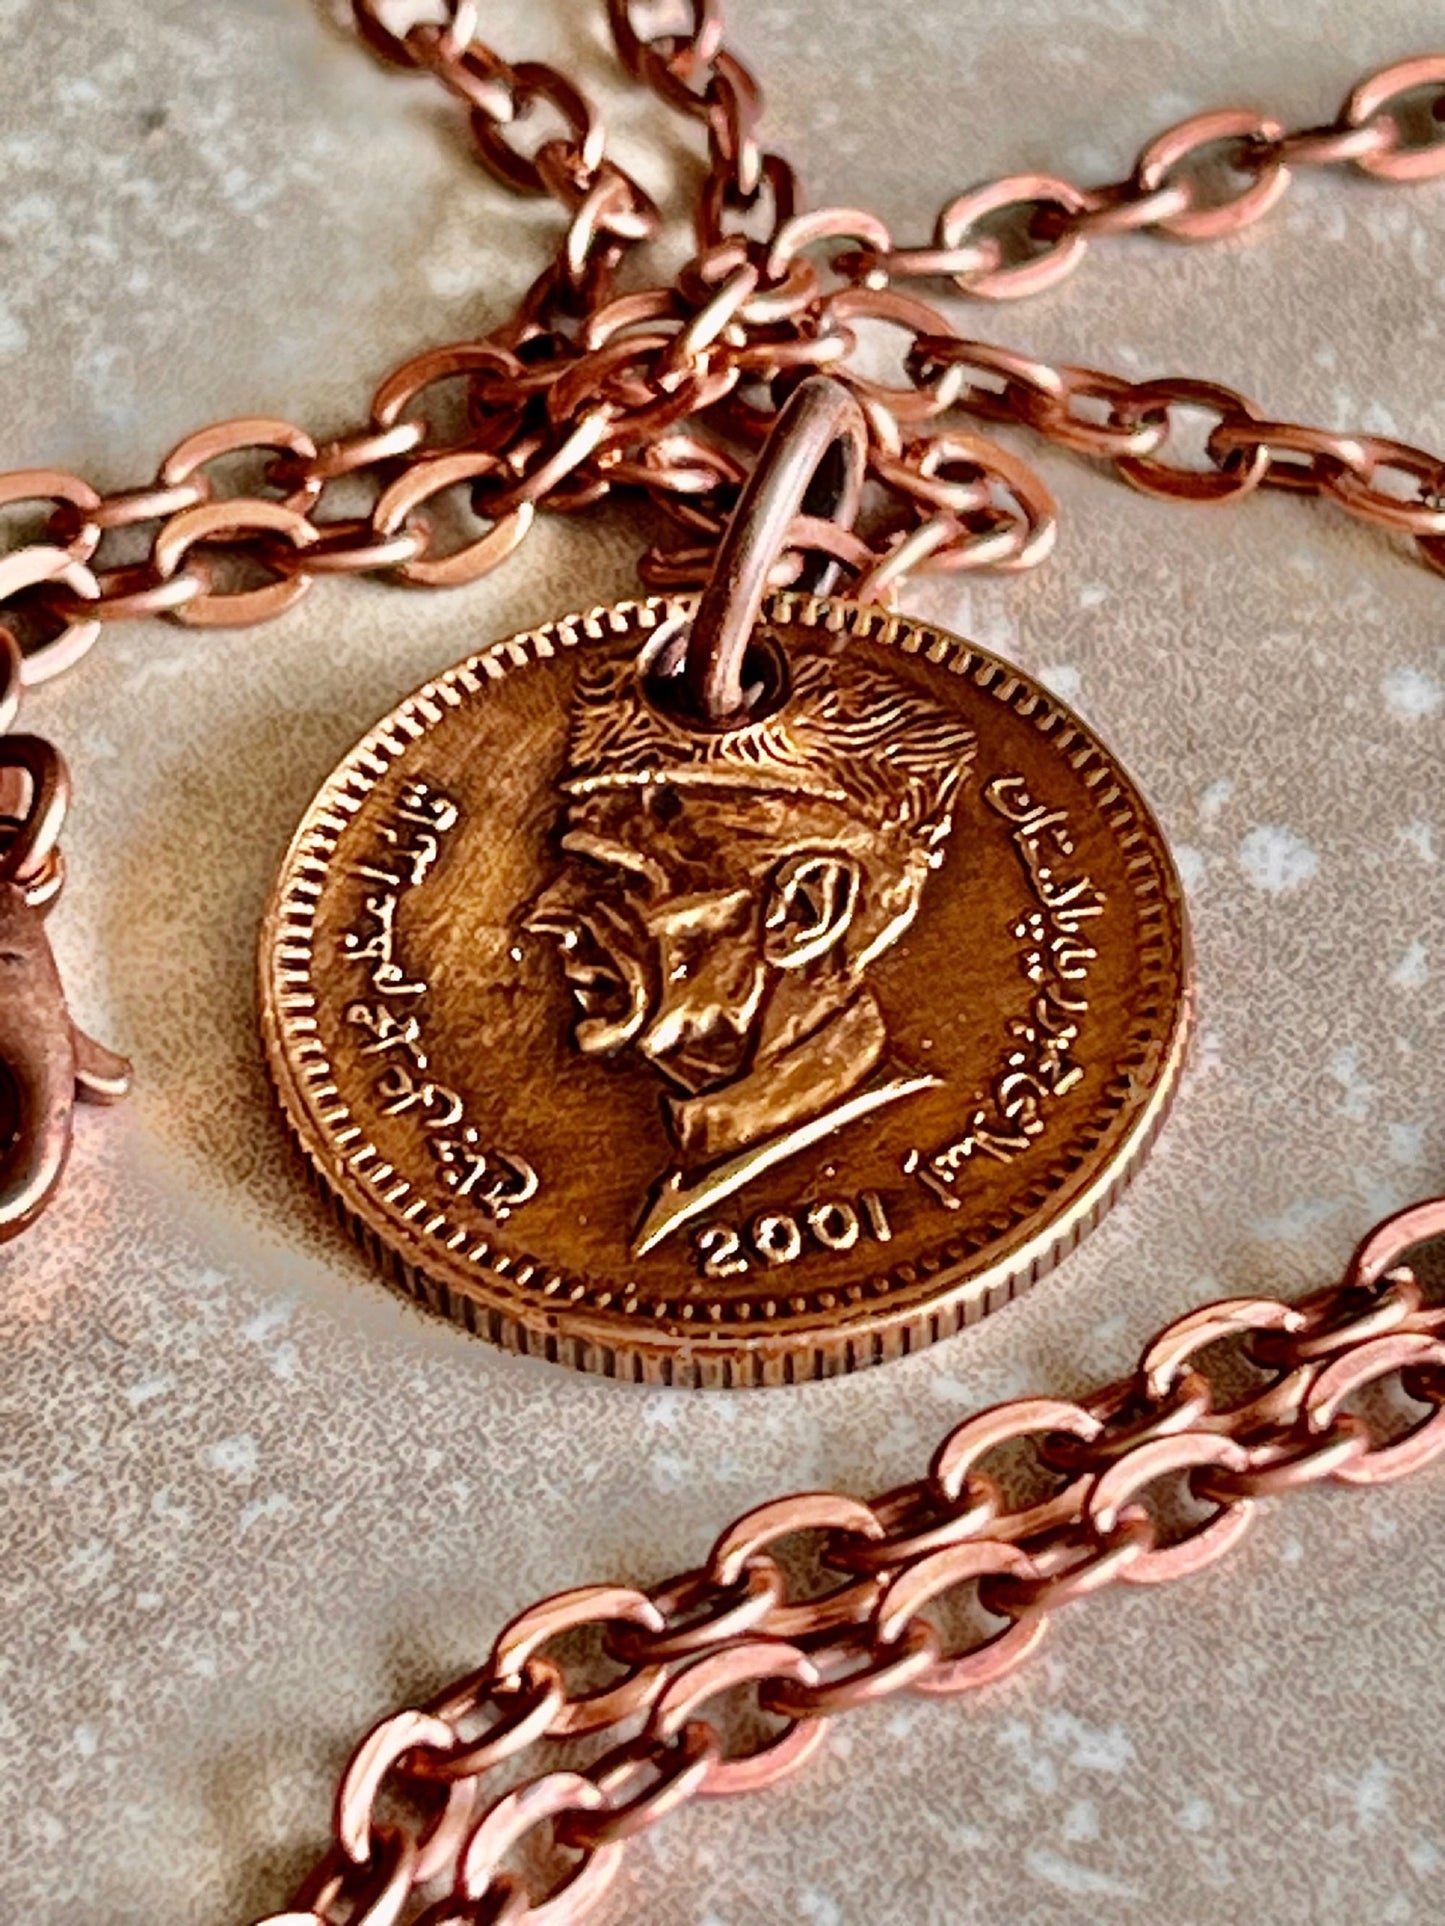 Pakistan Coin Pendant Pakistani 1 Rupee Personal Necklace Old Vintage Handmade Jewelry Gift Friend Charm For Him Her World Coin Collector